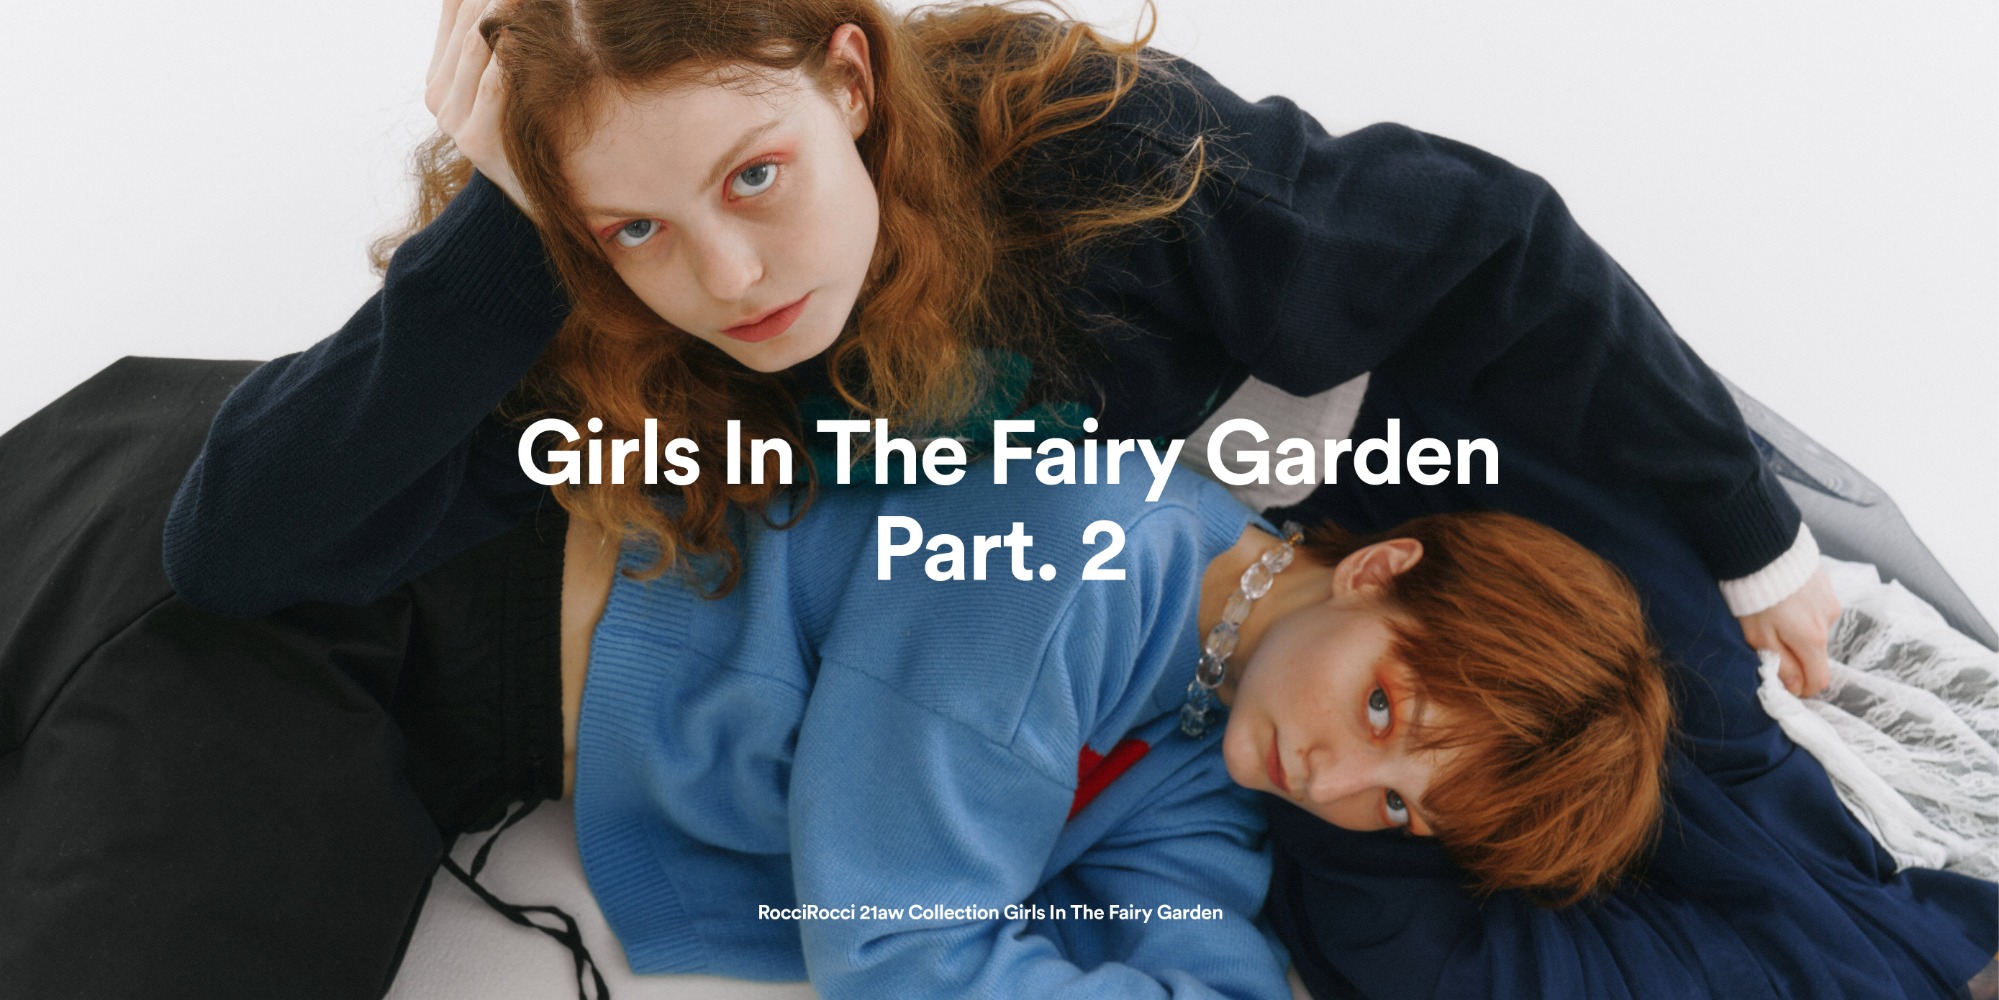 21 AW COLLECTION. Girls In The Fairy Garden - Part 0221 AW COLLECTION. Girls In The Fairy Garden - Part 02자체브랜드